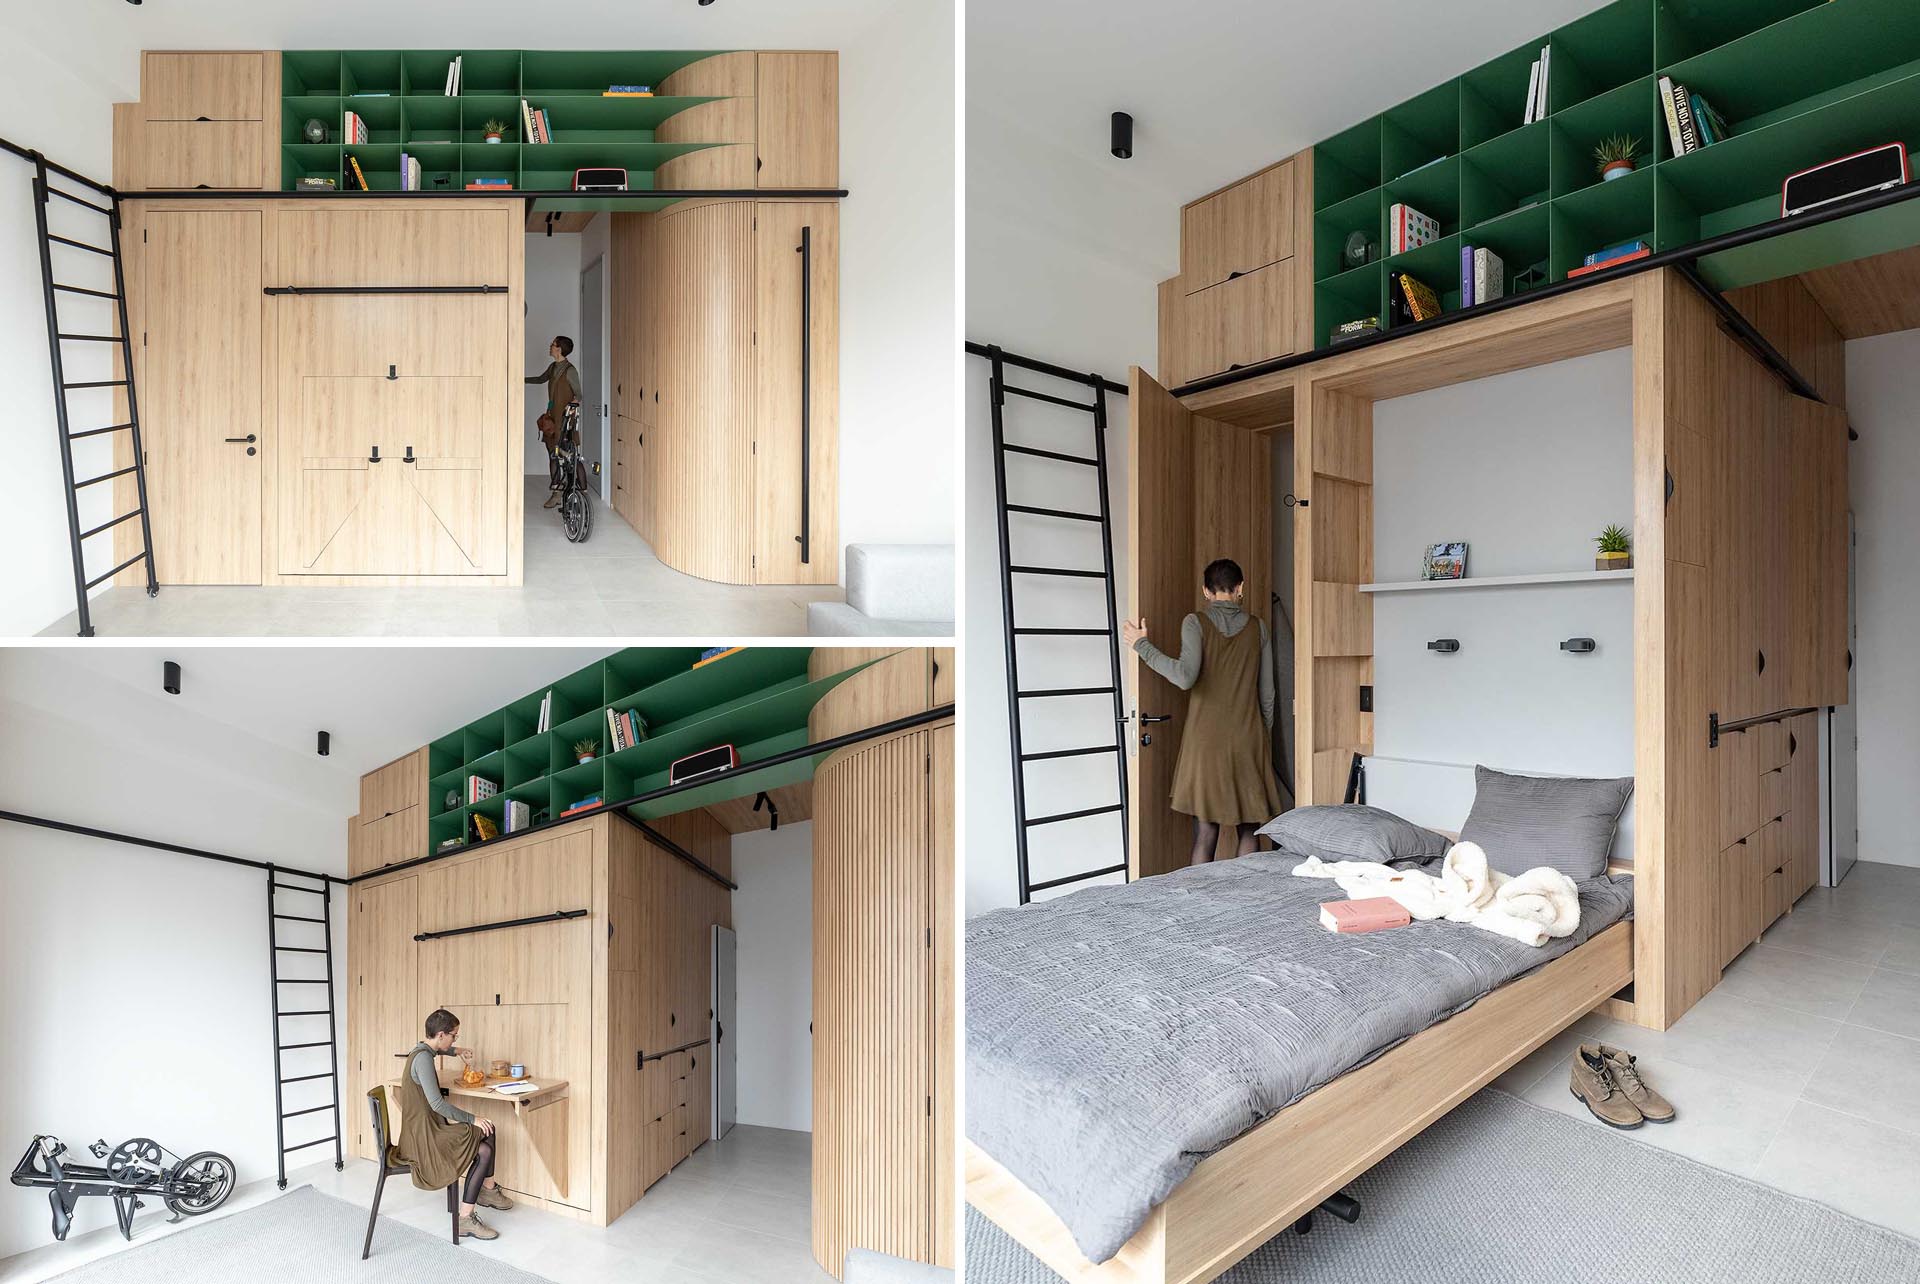 Custom cabinetry makes the most of the space in this small studio apartment.